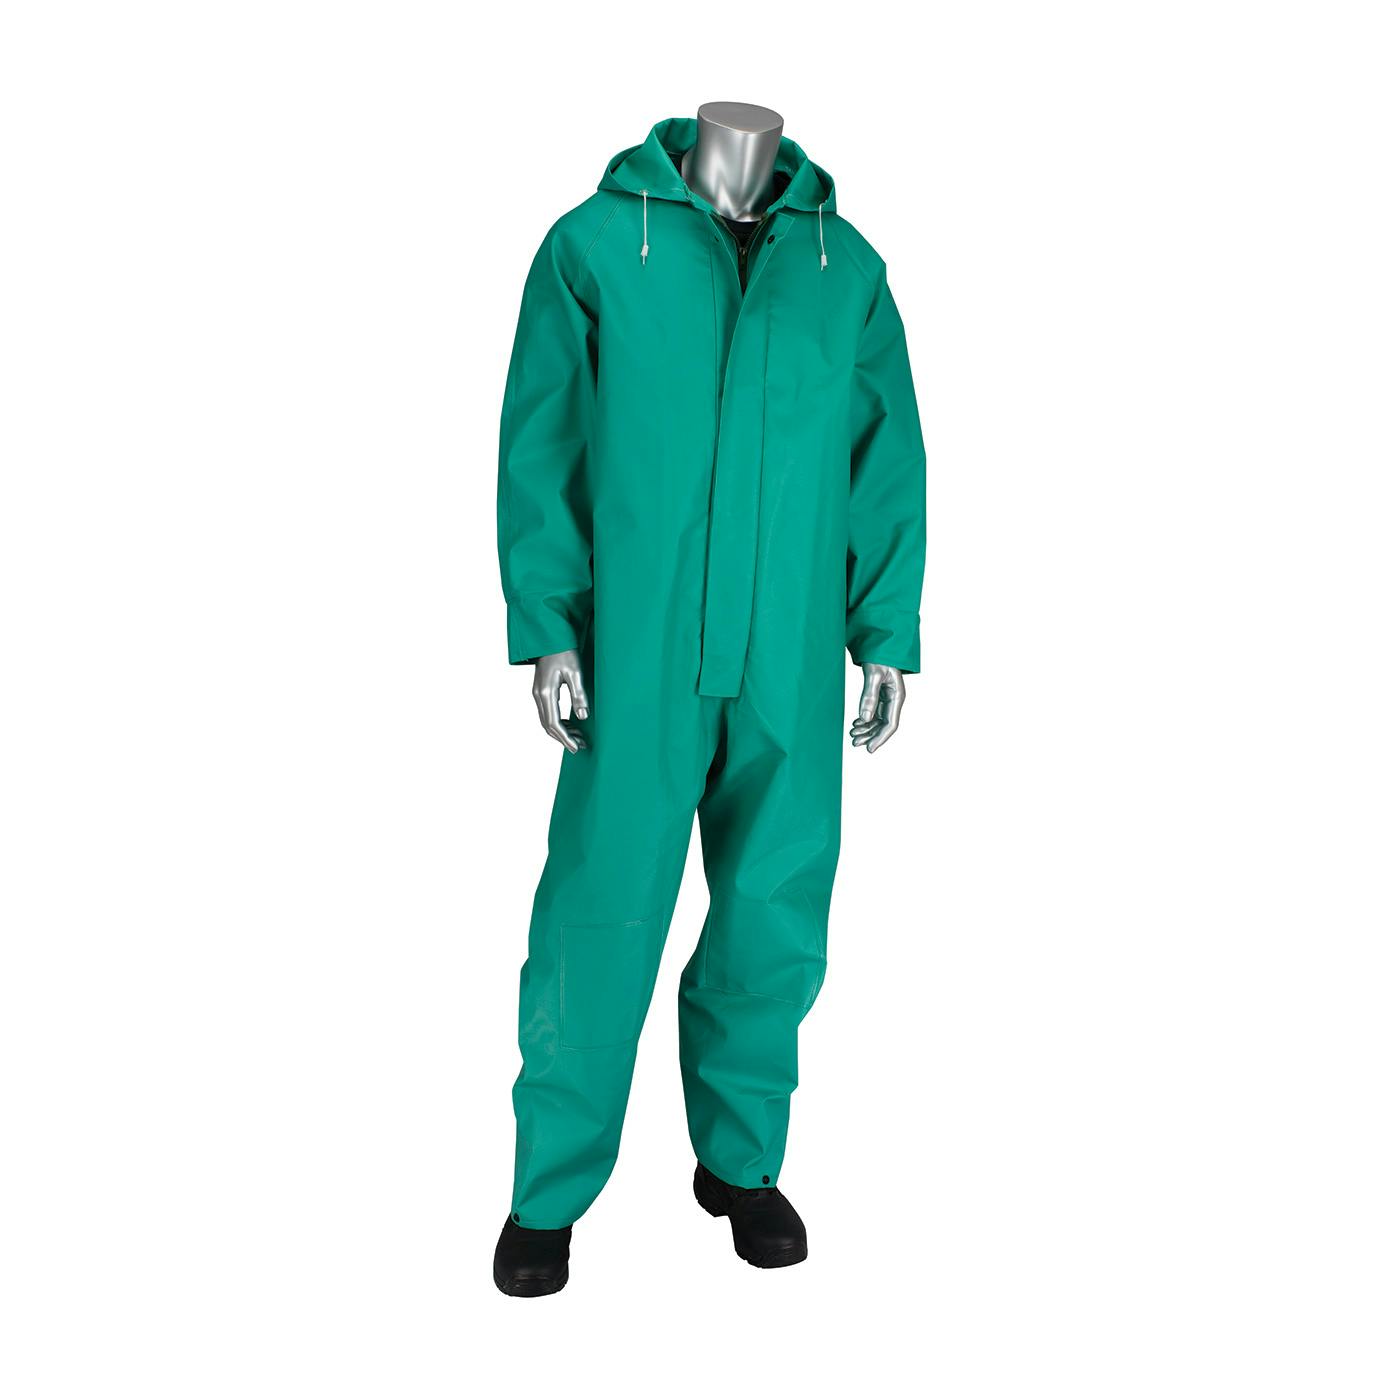 Treated PVC Coverall with Hood - 0.42 mm, Green (205-420CV)